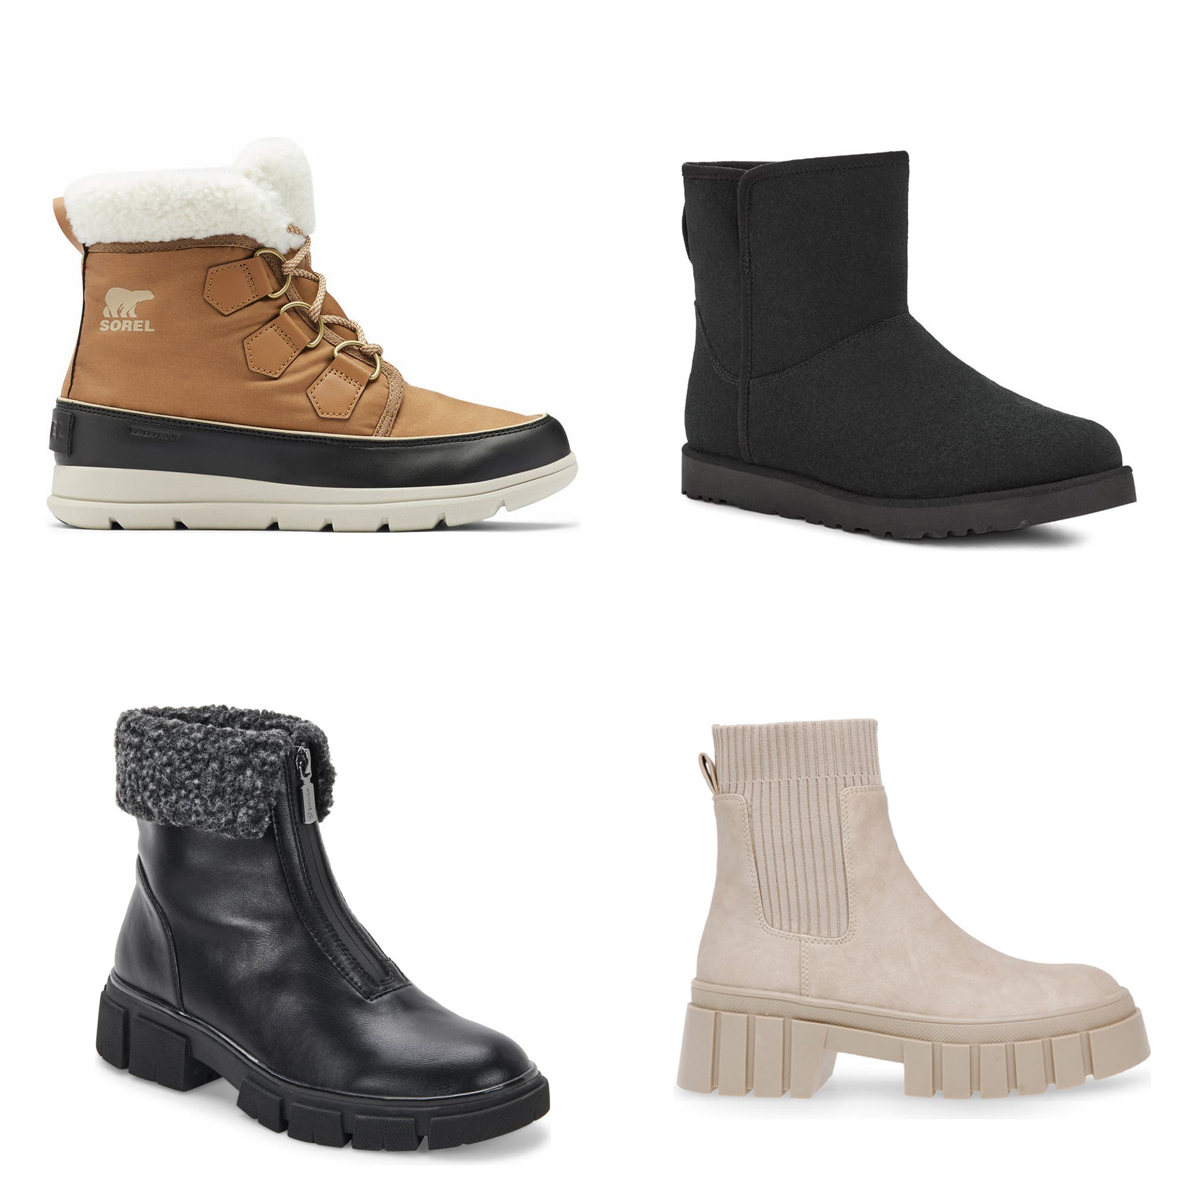 Winter boots are on sale at Nordstrom Rack! Here are 5 stylish yet  comfortable pairs up to 40% off